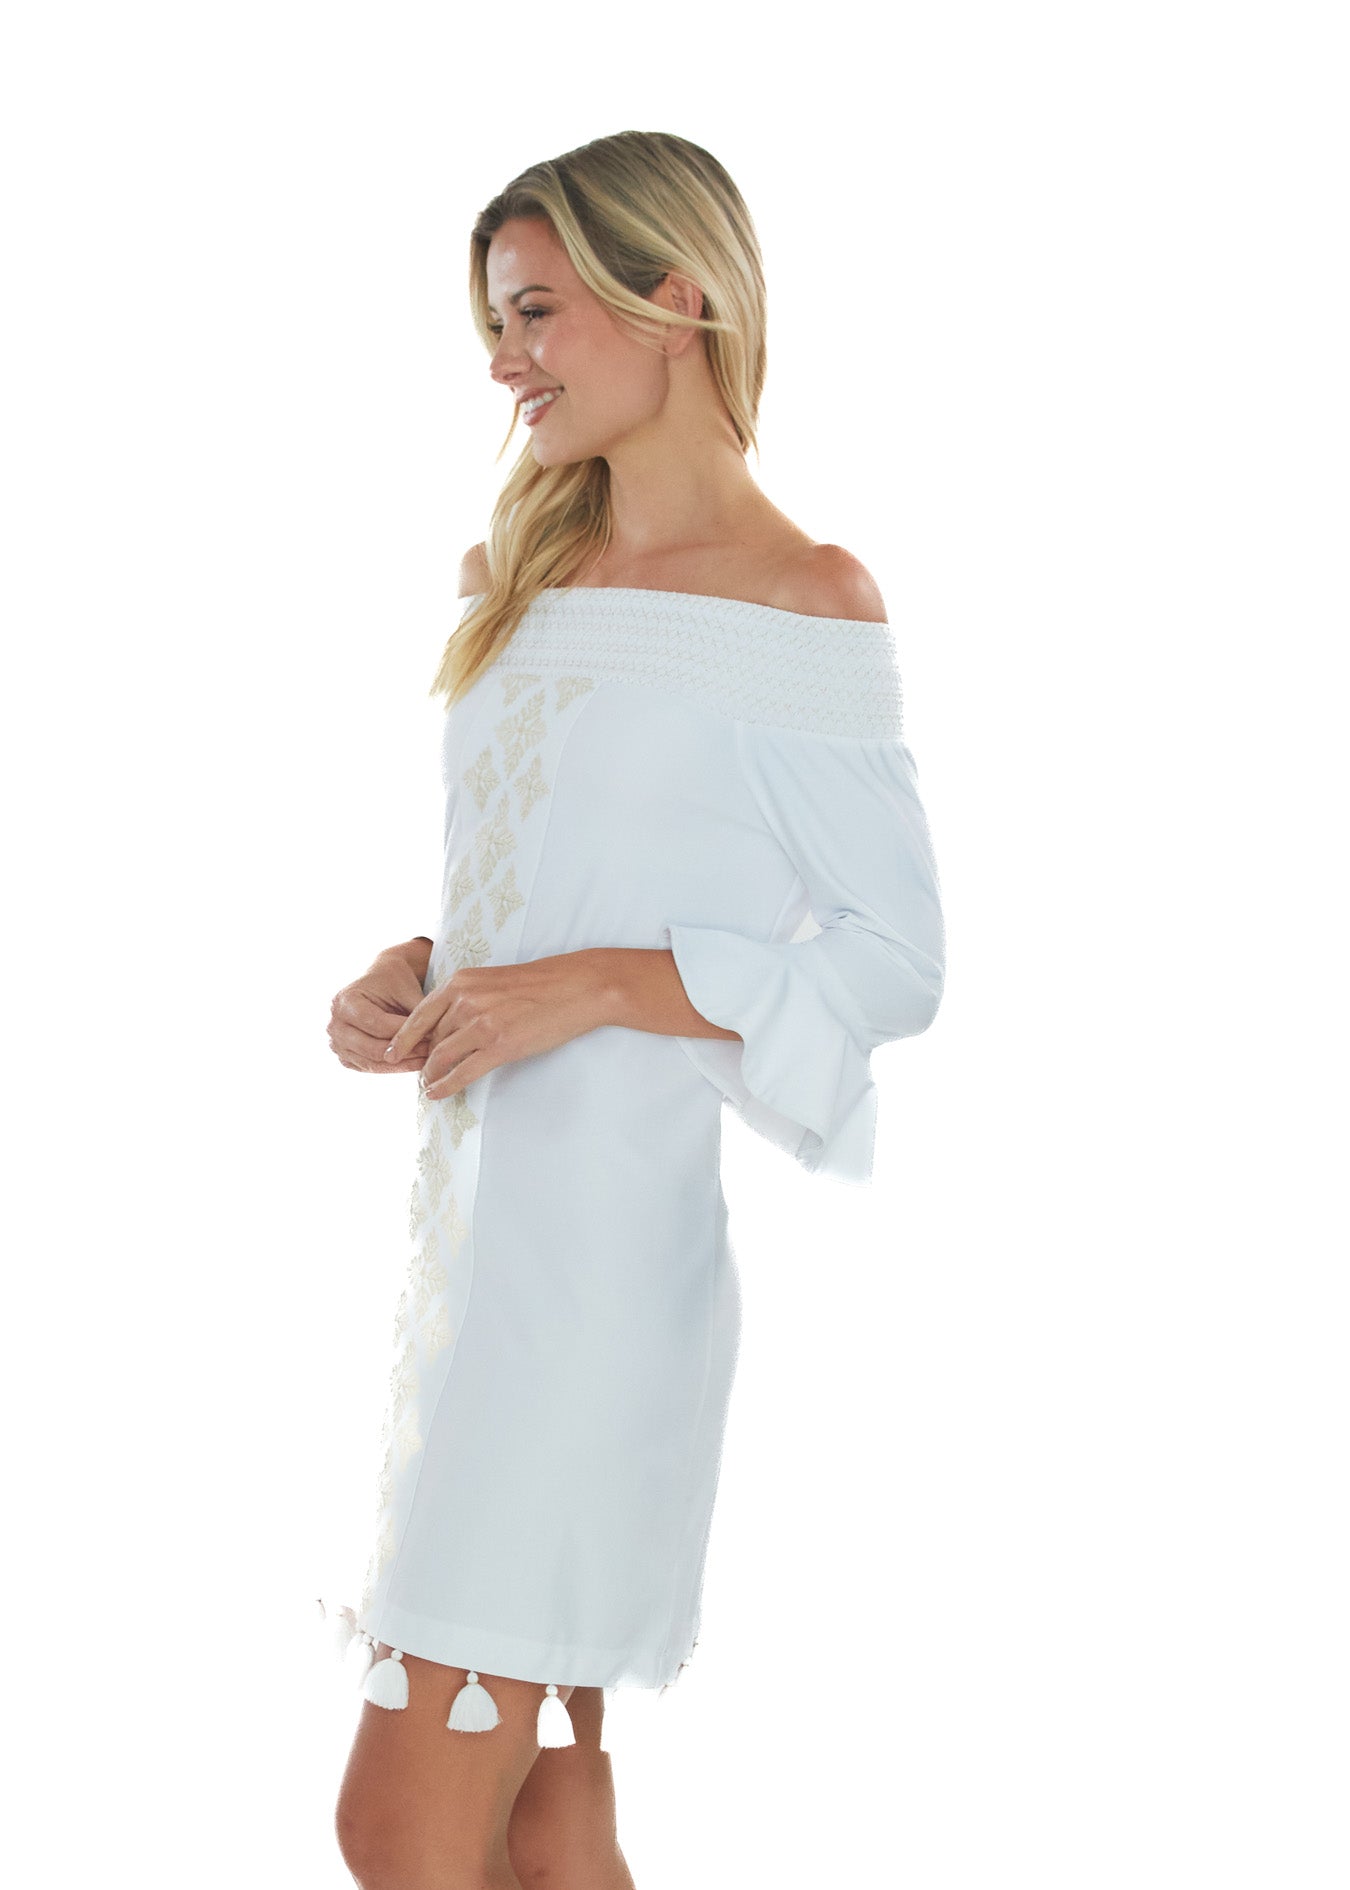 Side facing blonde model wearing the White Embroidered Off The Shoulder Dress while smiling.